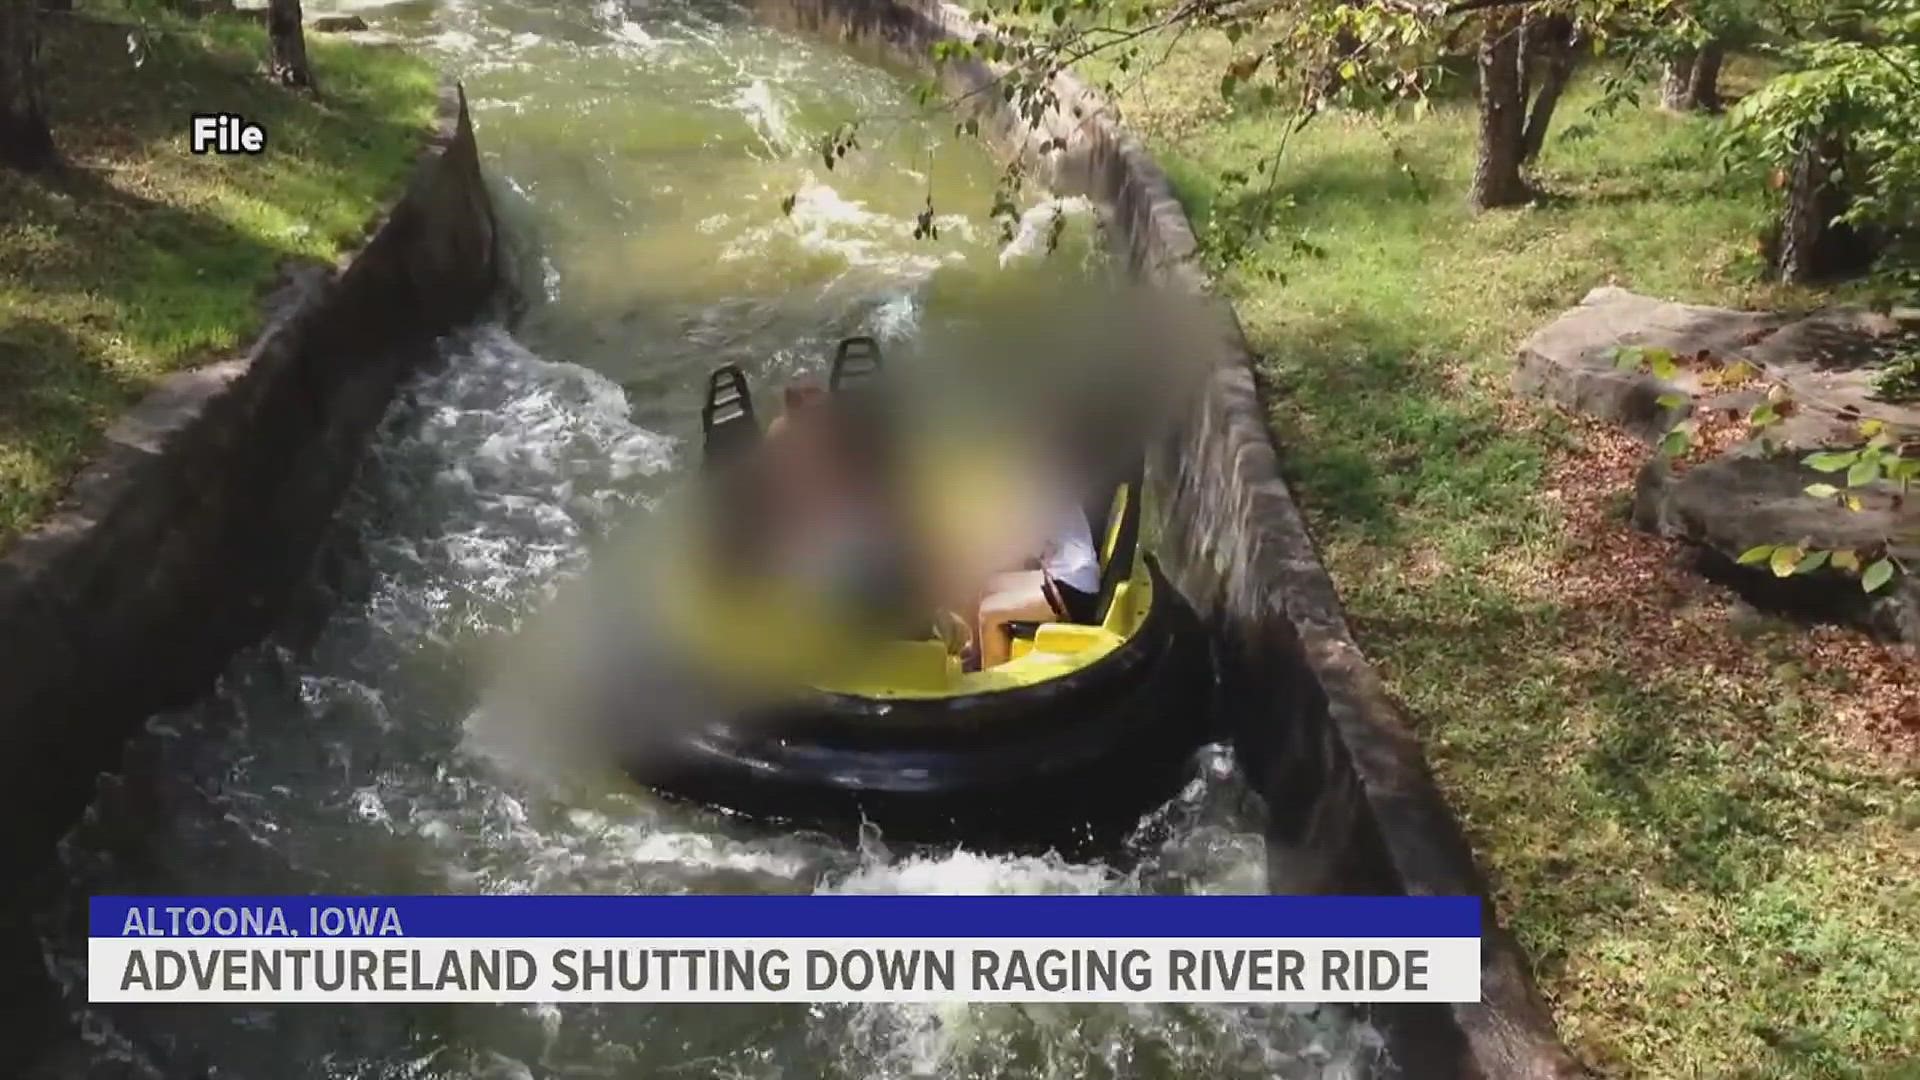 The managers of Adventureland in the Des Moines metro area say they will never reopen a ride where an 11-year-old boy was killed.